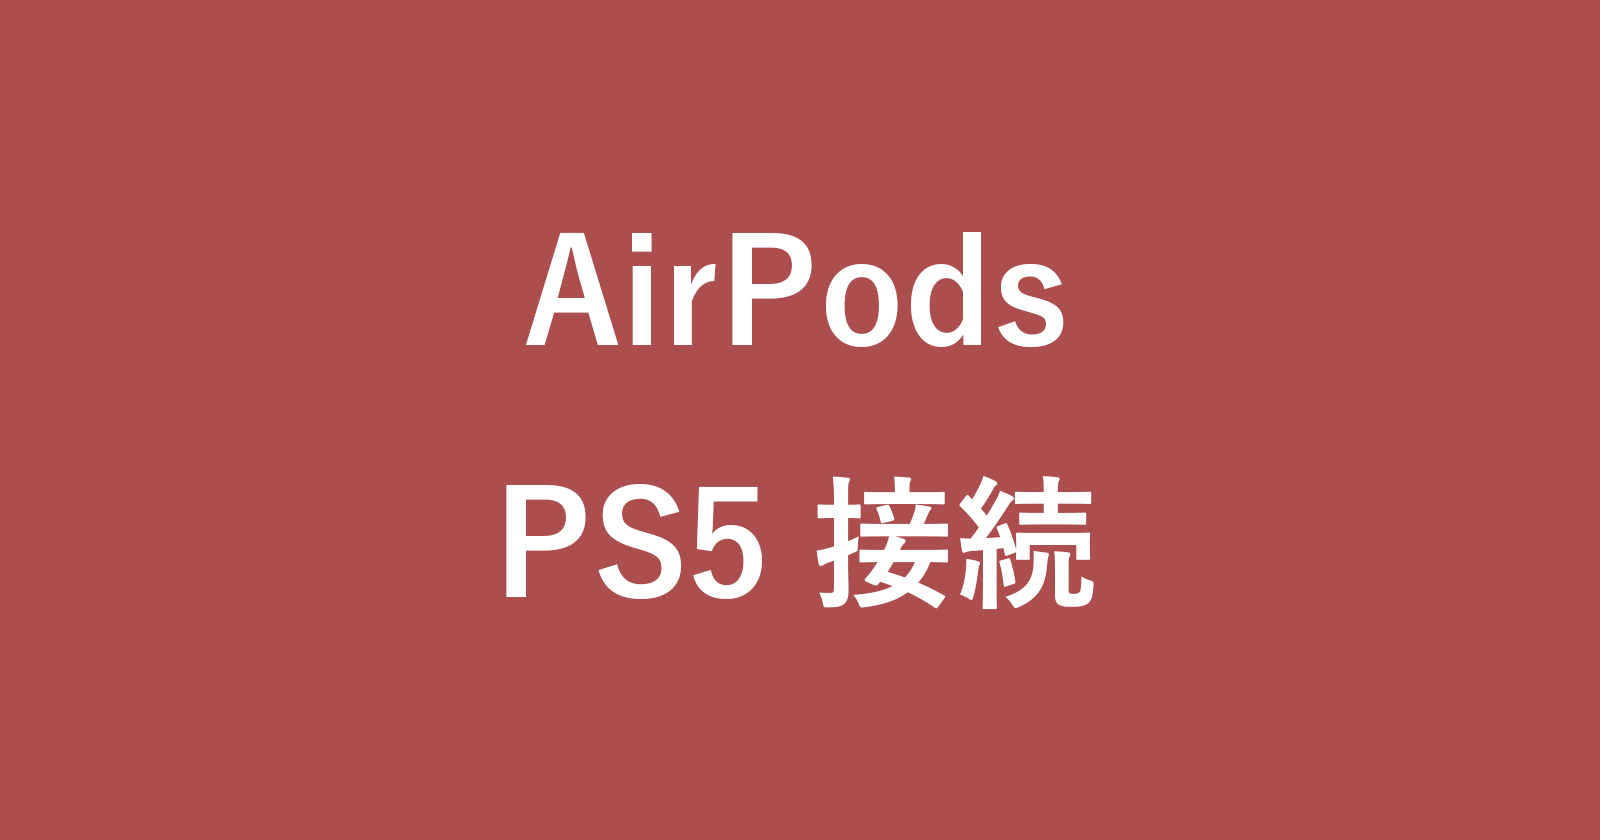 ps5 airpods pairing